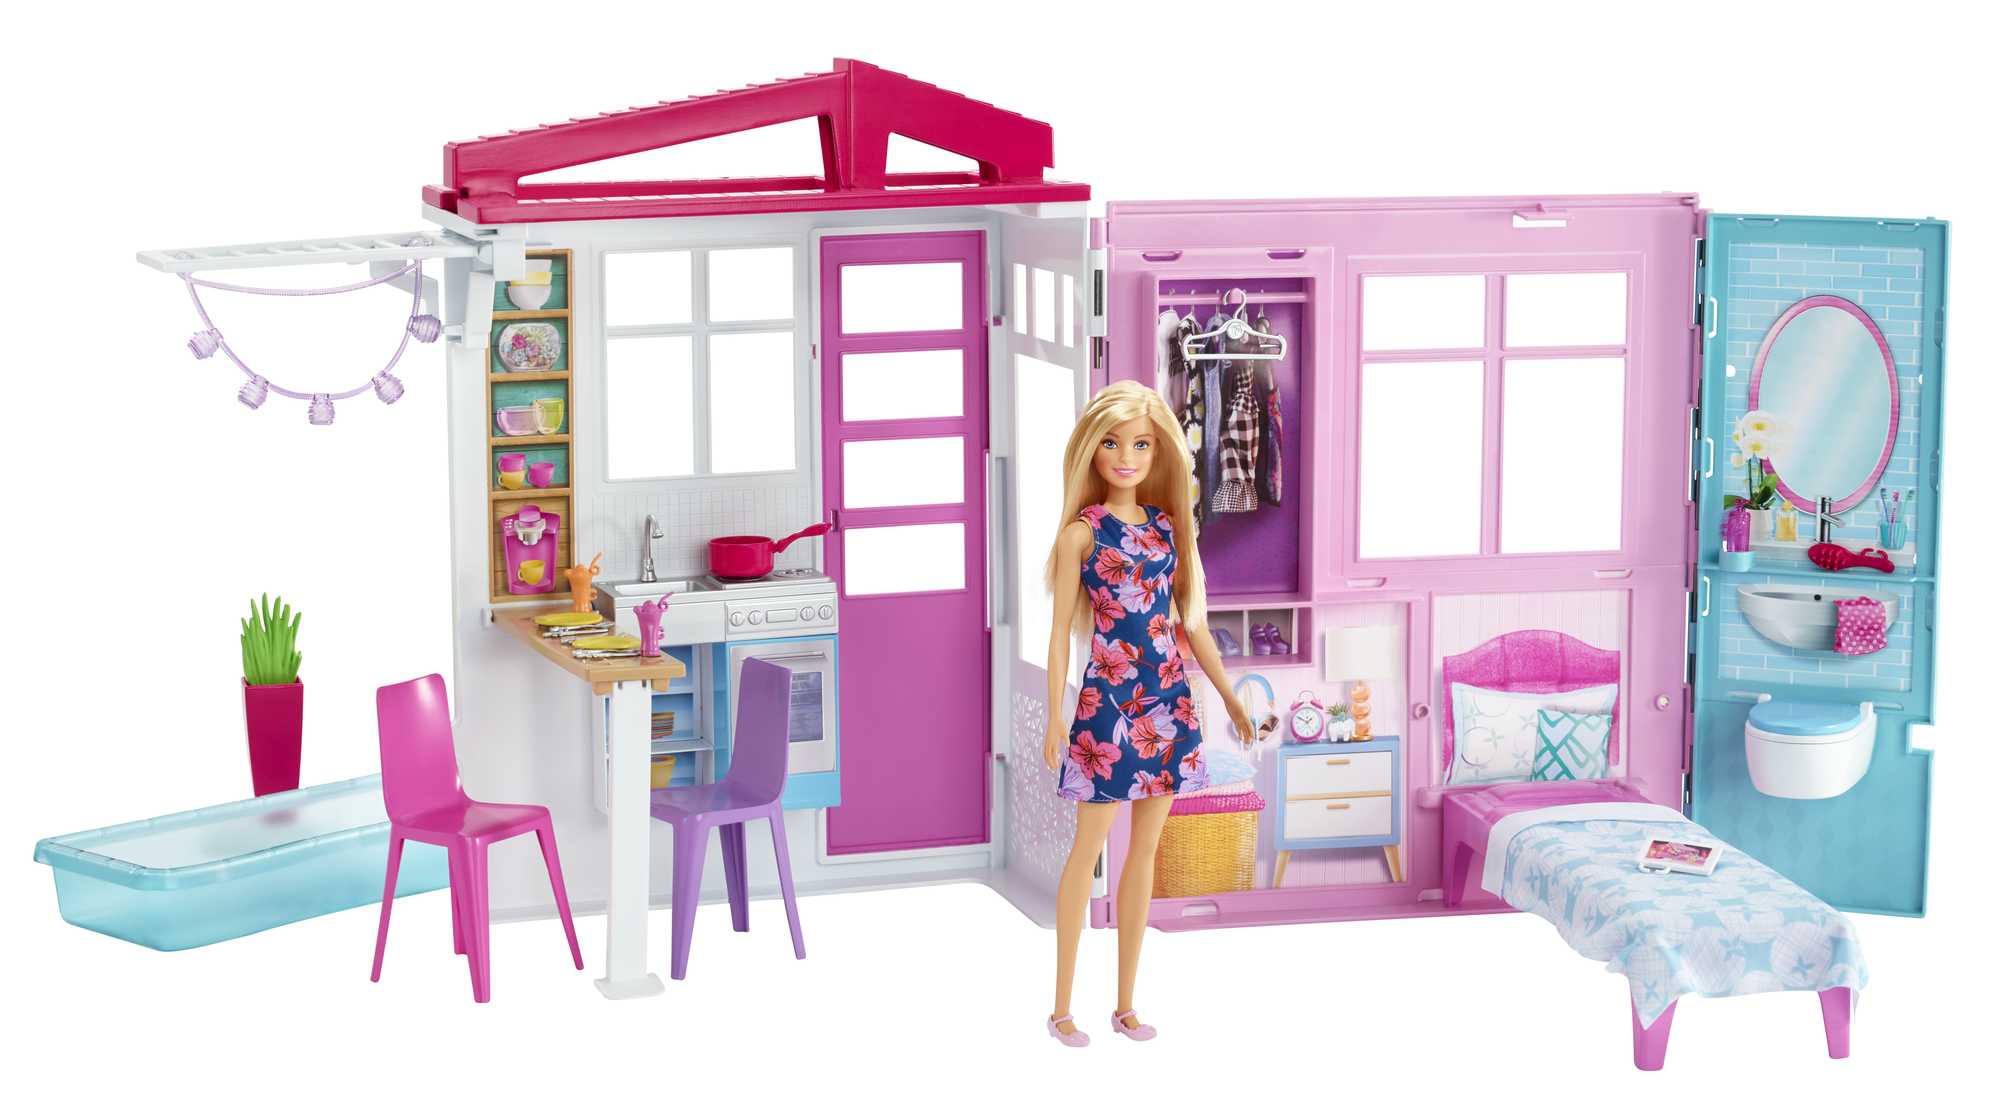 Doll, Furniture and Accessories | GWY84